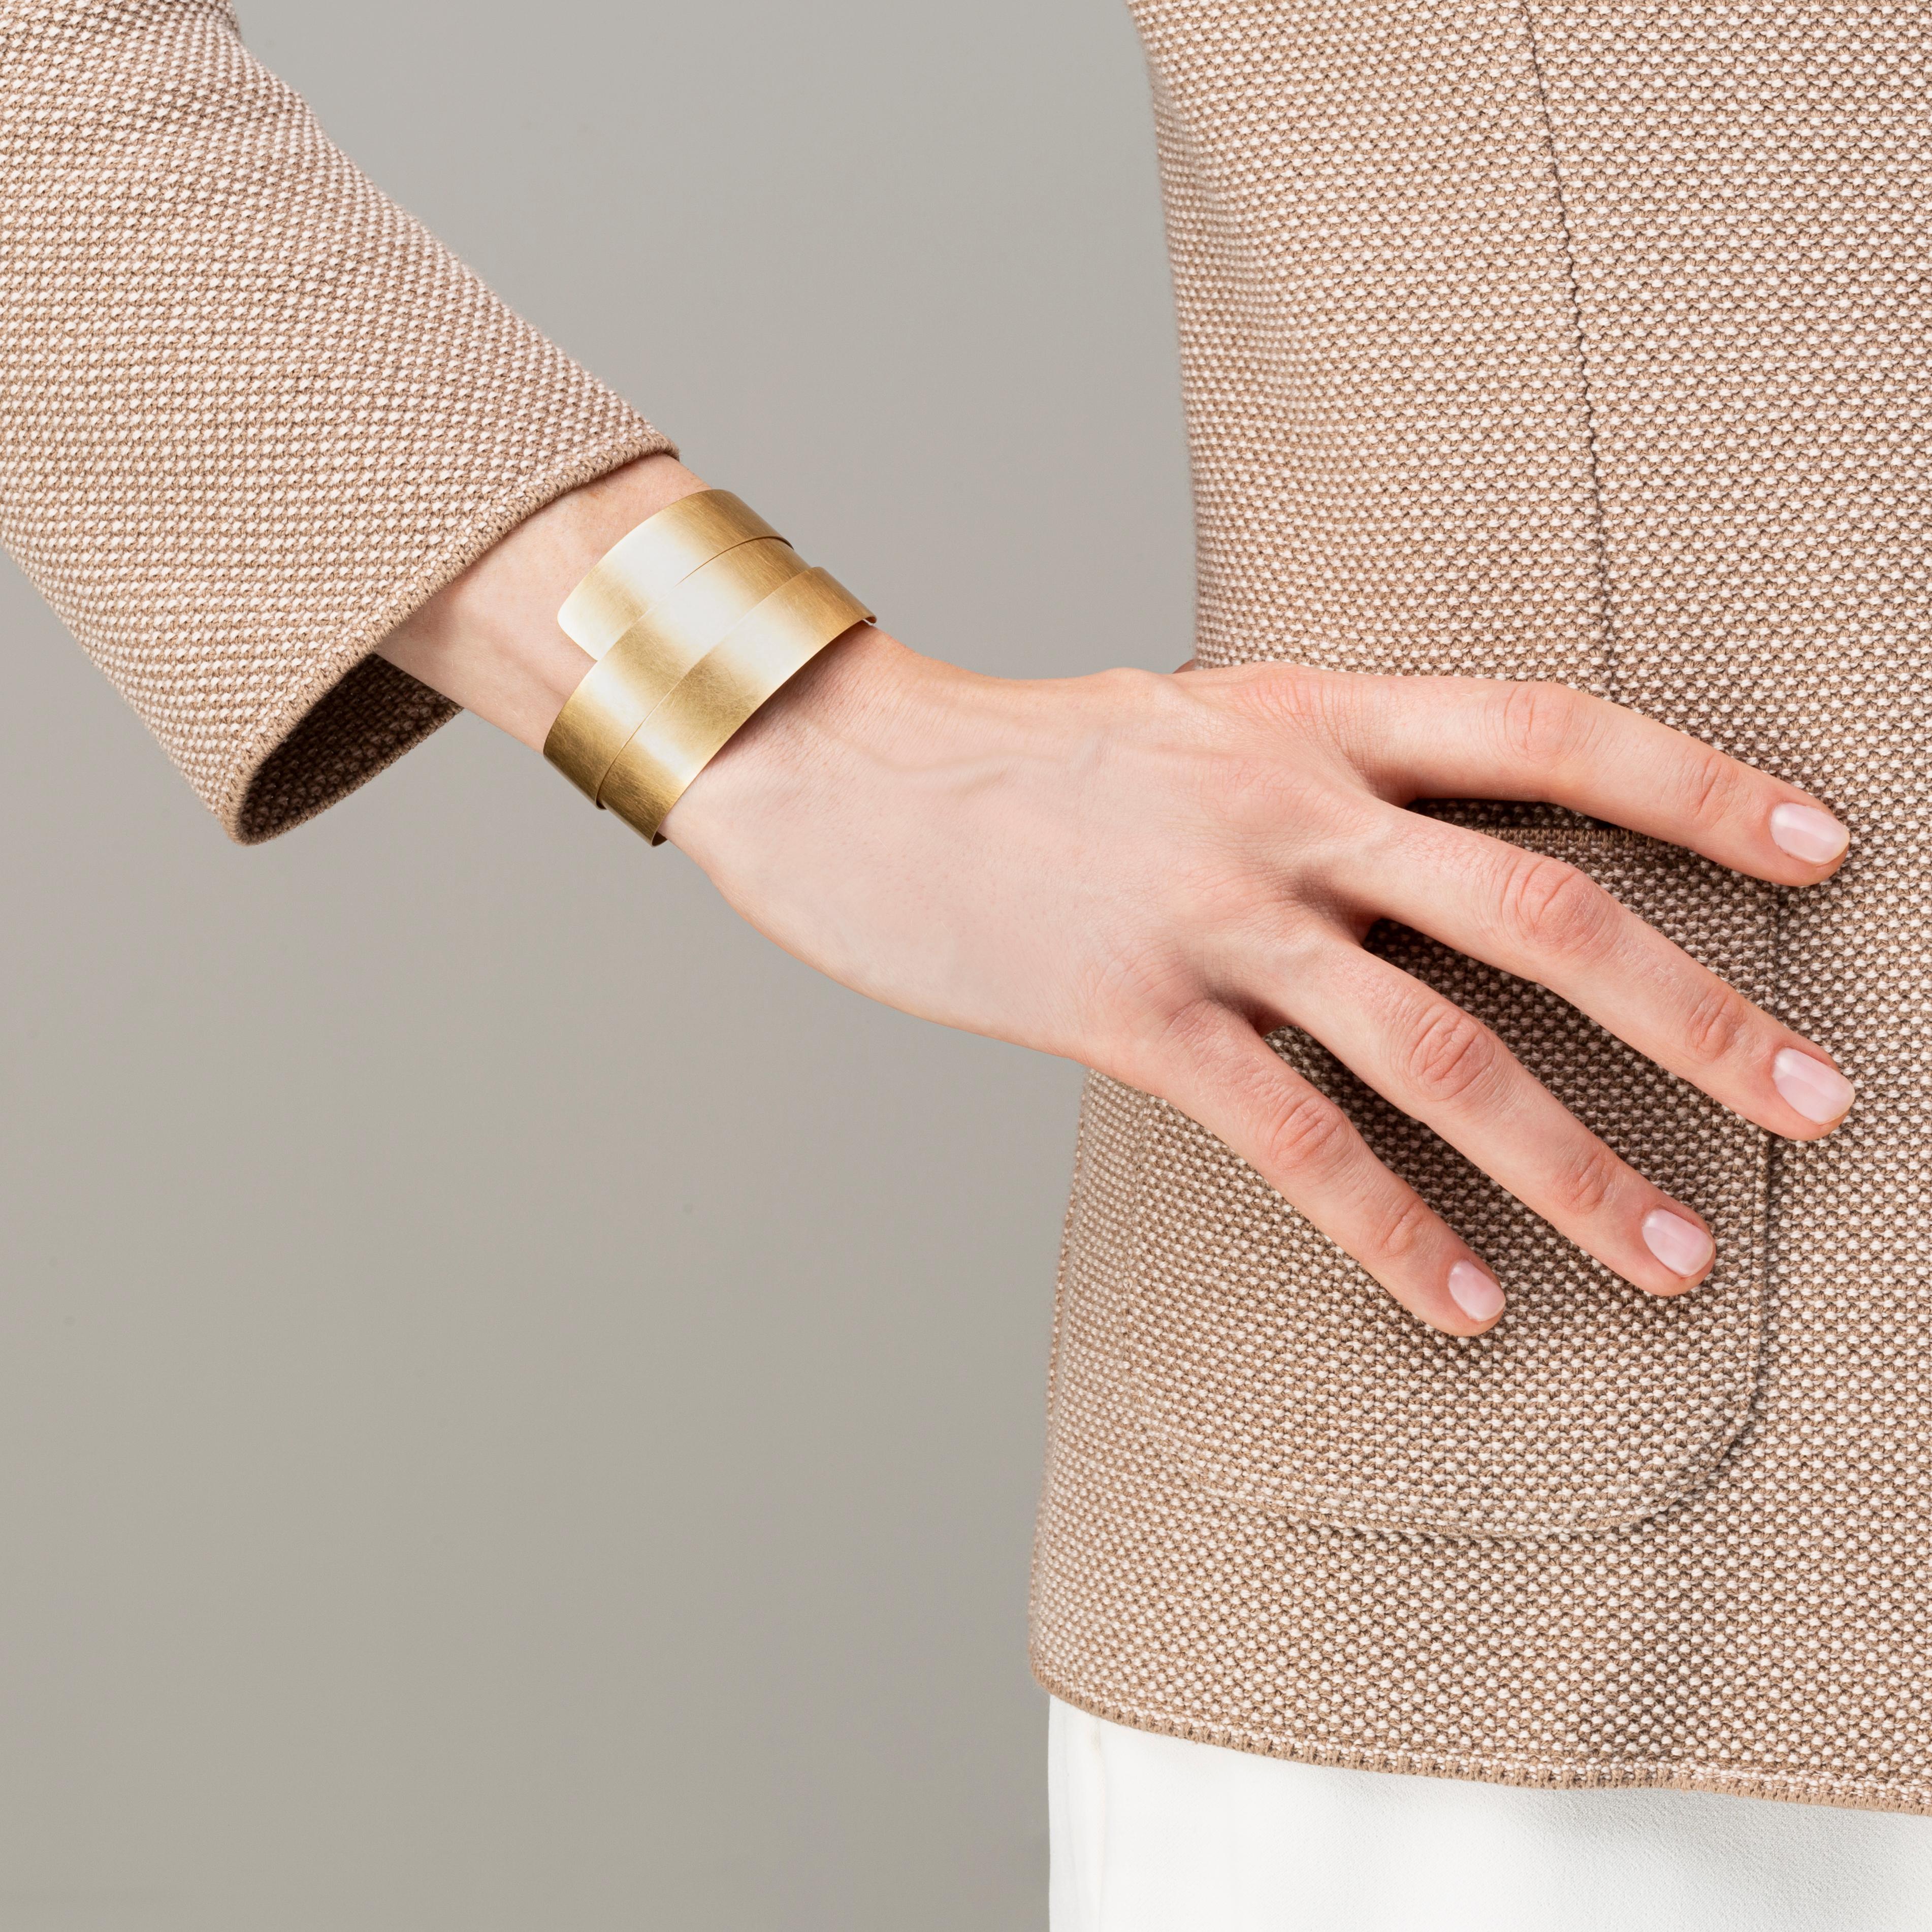 Alex Jona design collection, hand crafted in Italy, 18 karat brushed yellow gold cuff bracelet that wraps around the wrist. Dimensions: Width 11.95 mm, 51.08 mm Diameter,  Depth 0.66 mm.

Alex Jona jewels stand out, not only for their special design